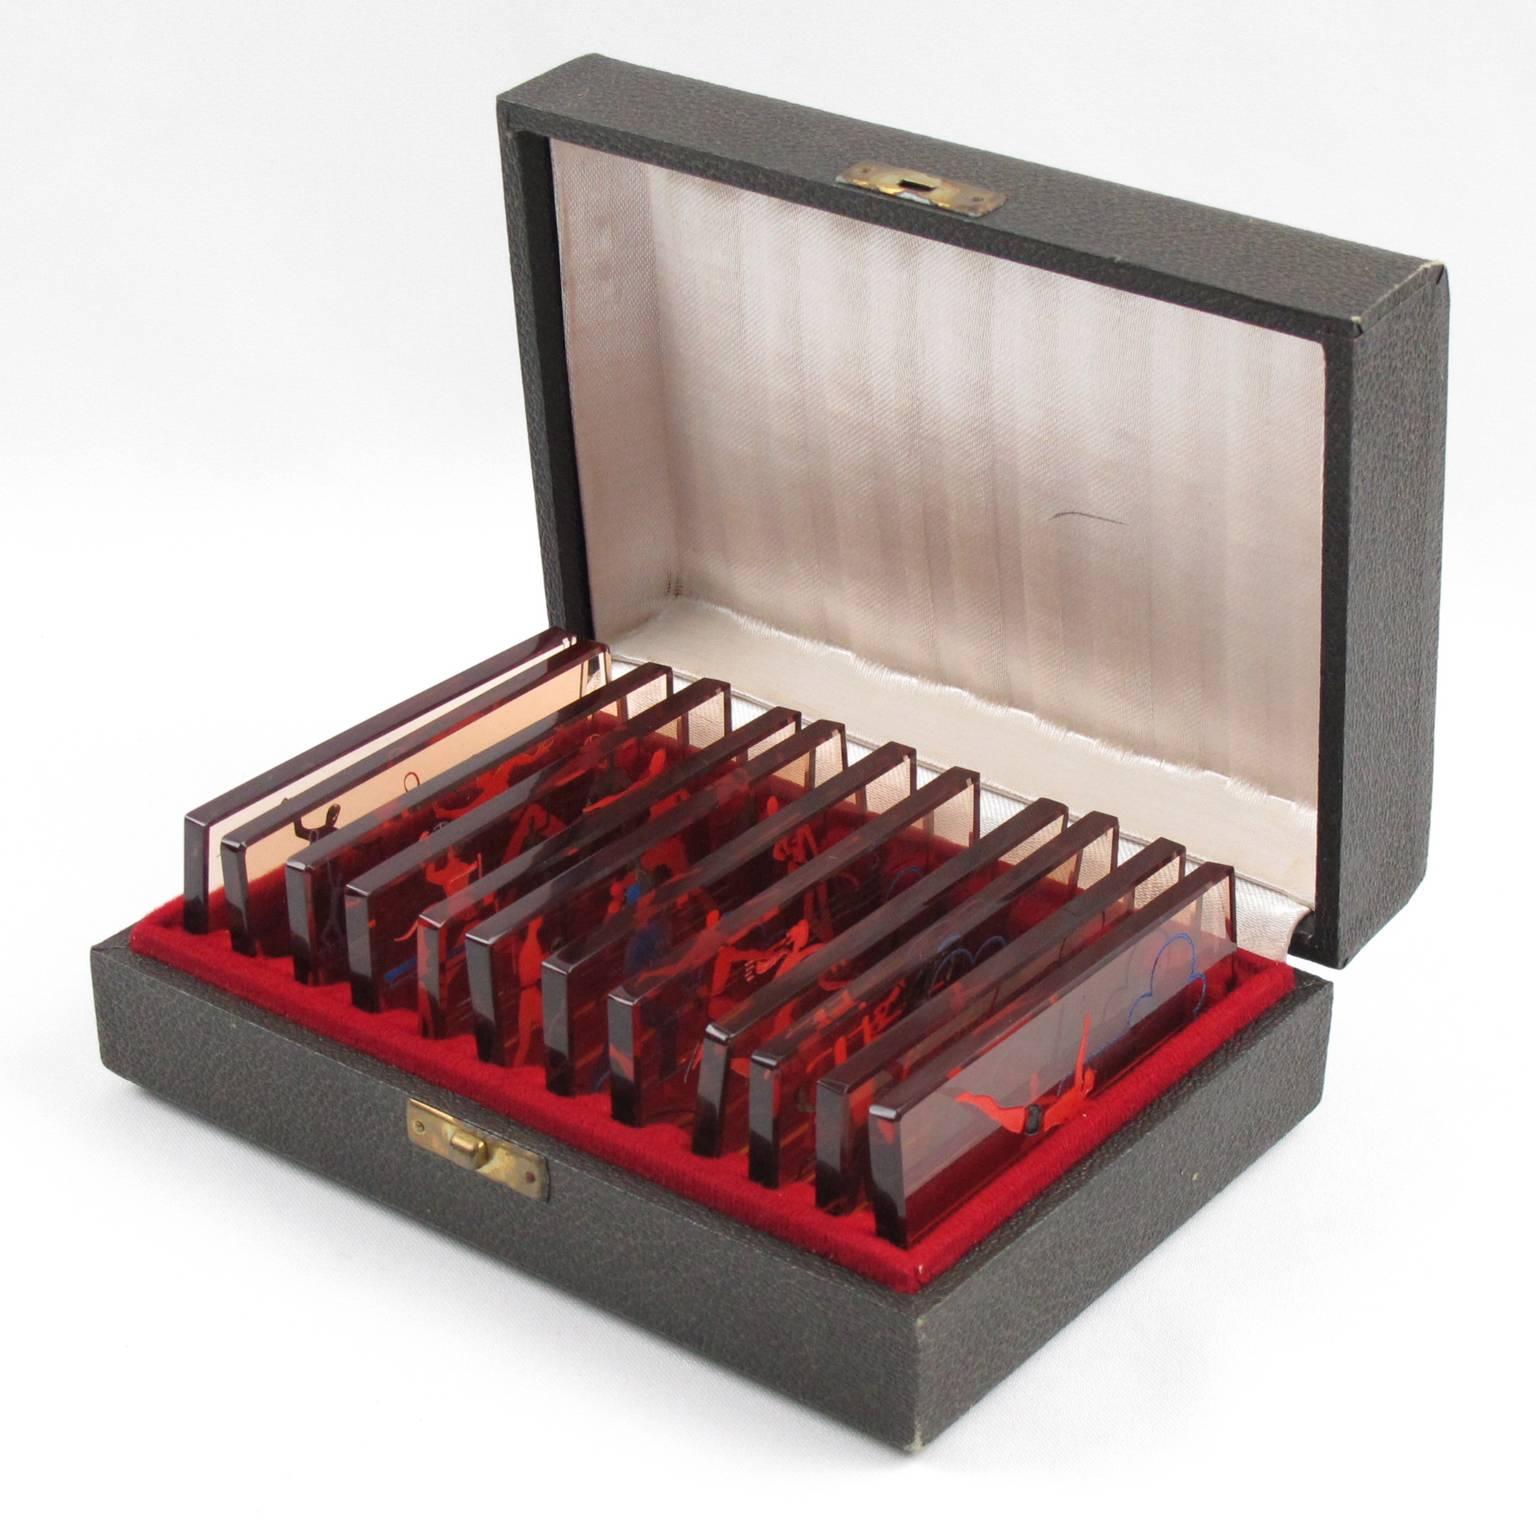 Extremely rare complete knife rests set (12 pieces), in original box, France, circa 1930s. Gorgeous thick copper glass slab knife rests set with reverse etched design and paint application. Highly collectible sport memorabilia, each knife rest has a